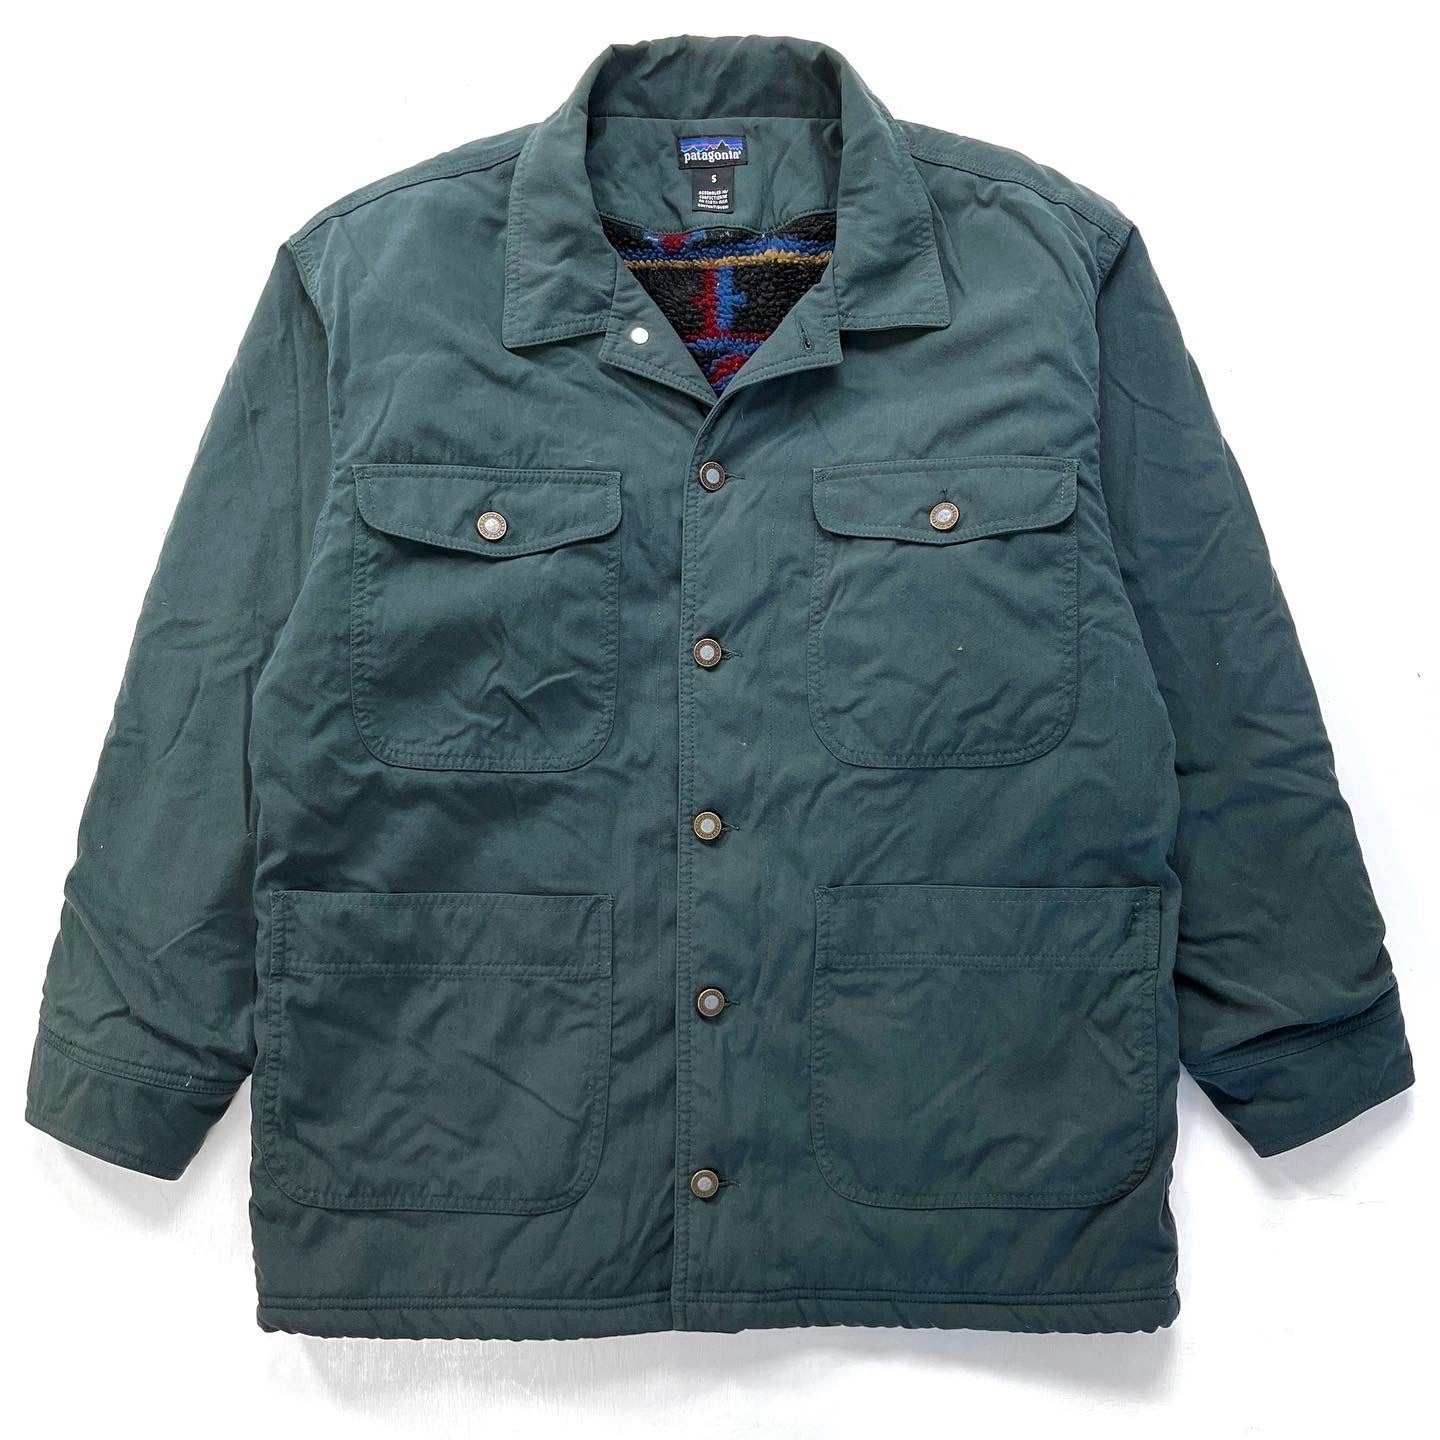 1996 Patagonia Pile-Lined Canvas Nuevo Range Coat, Spruce (S/M)